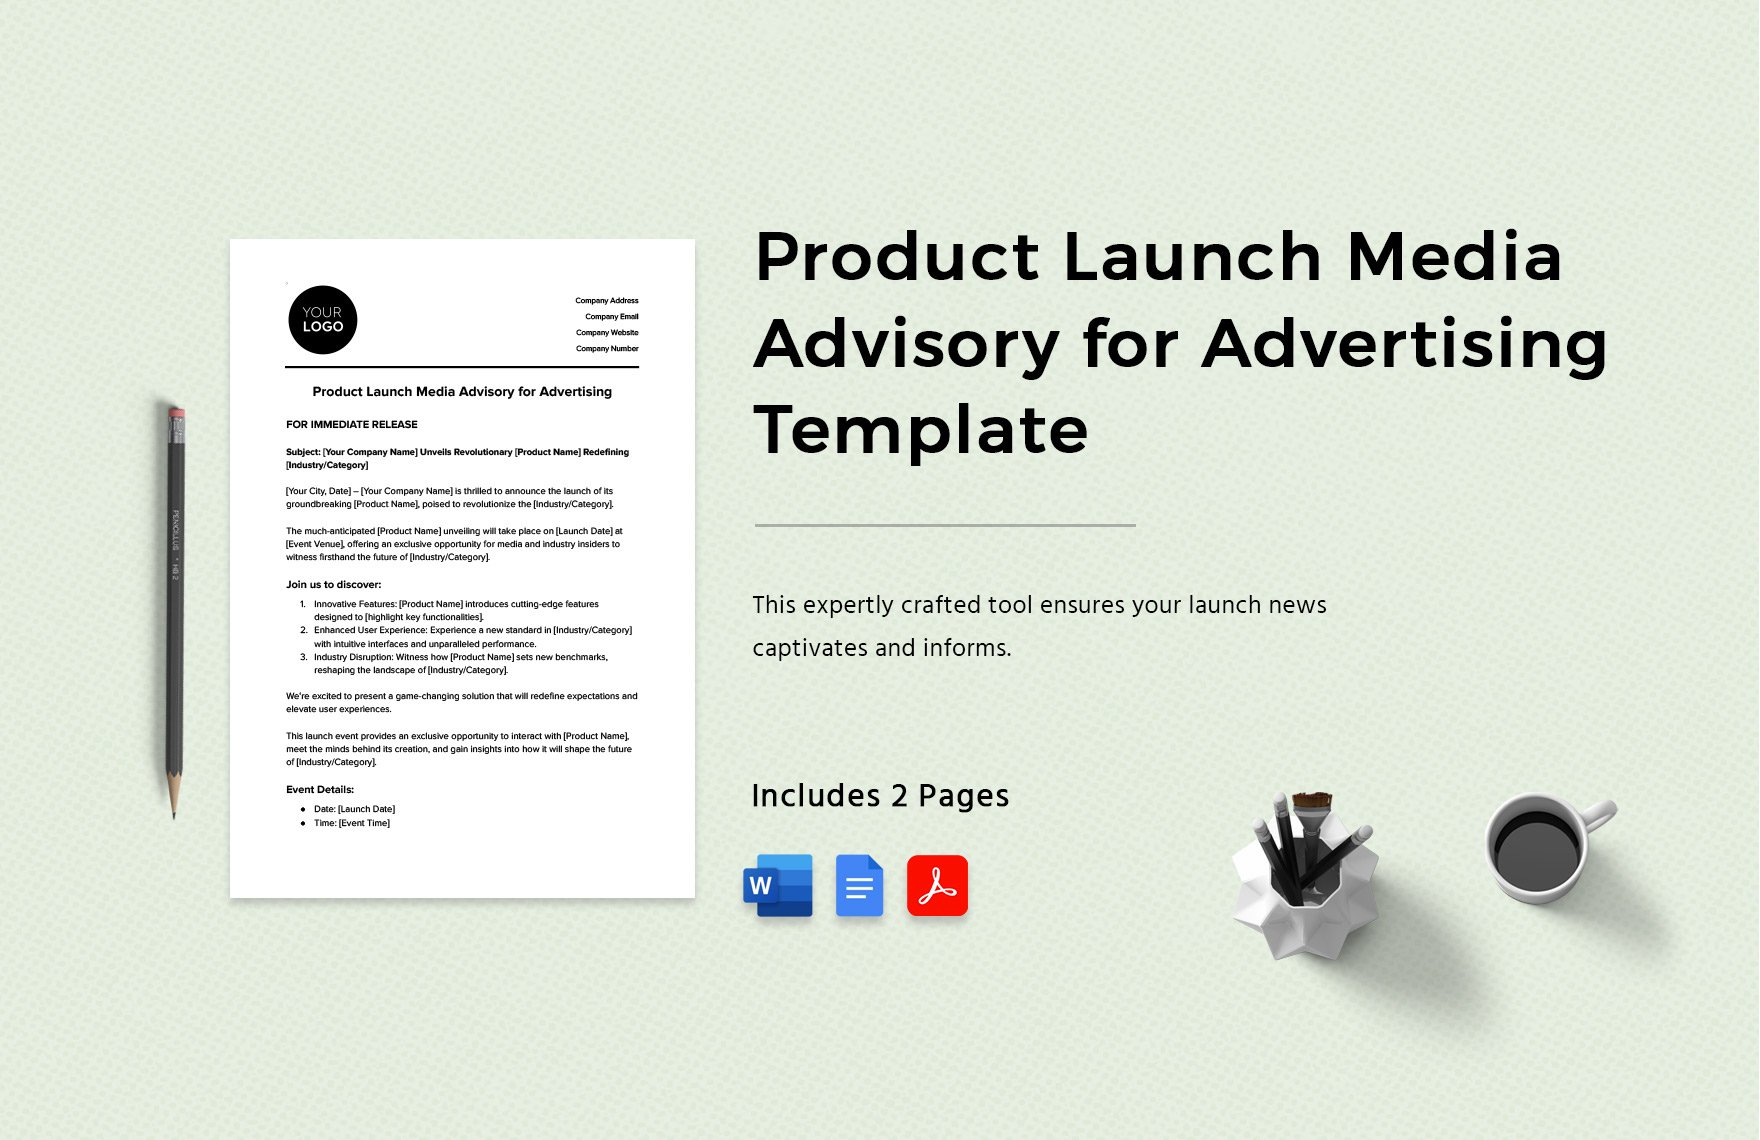 Product Launch Media Advisory for Advertising Template in Word, Google Docs, PDF